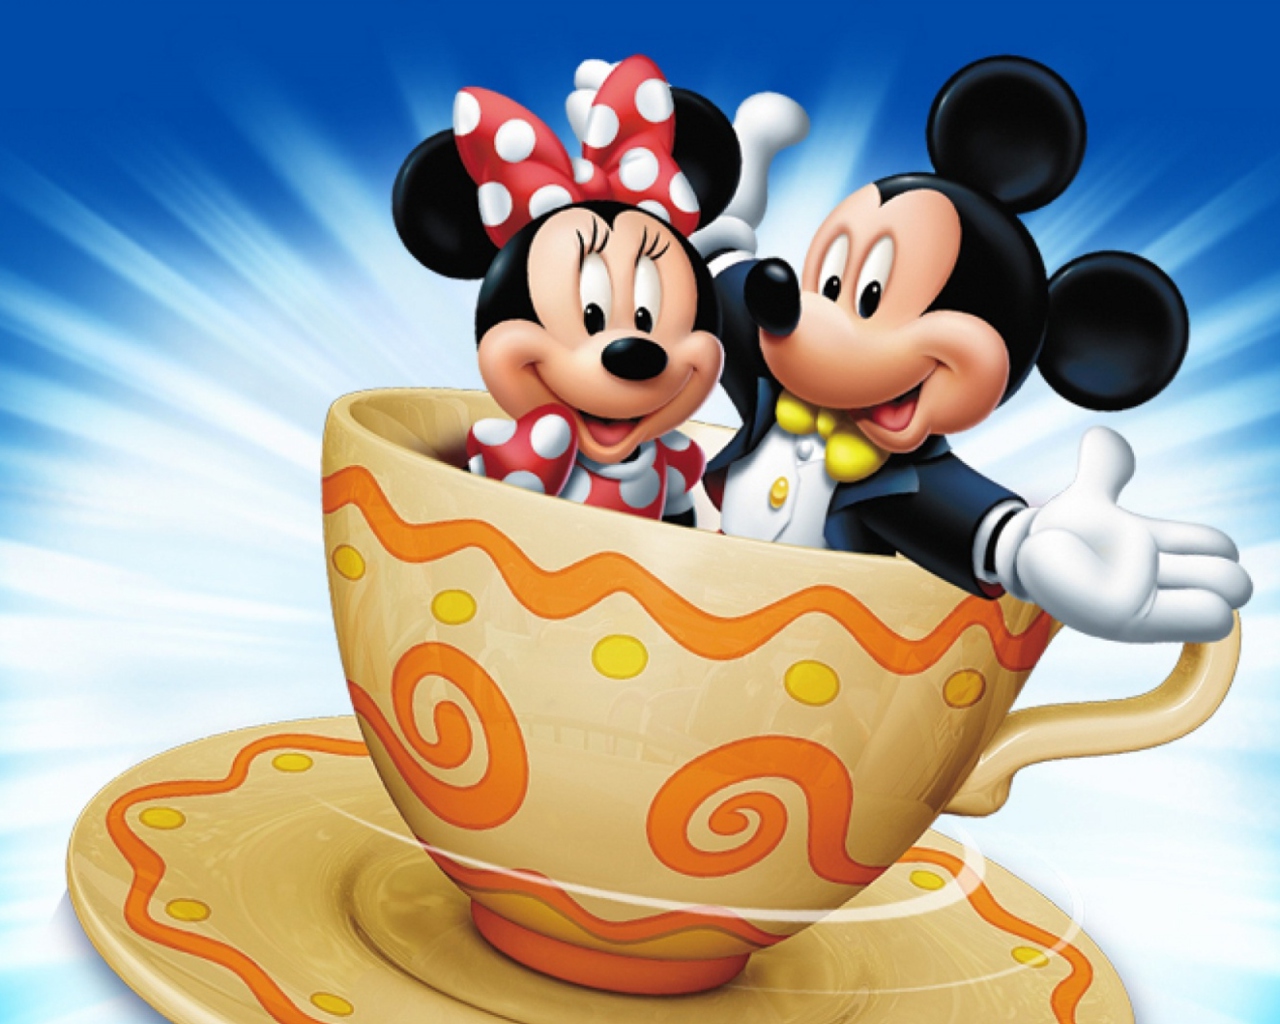 Das Mickey And Minnie Mouse In Cup Wallpaper 1280x1024